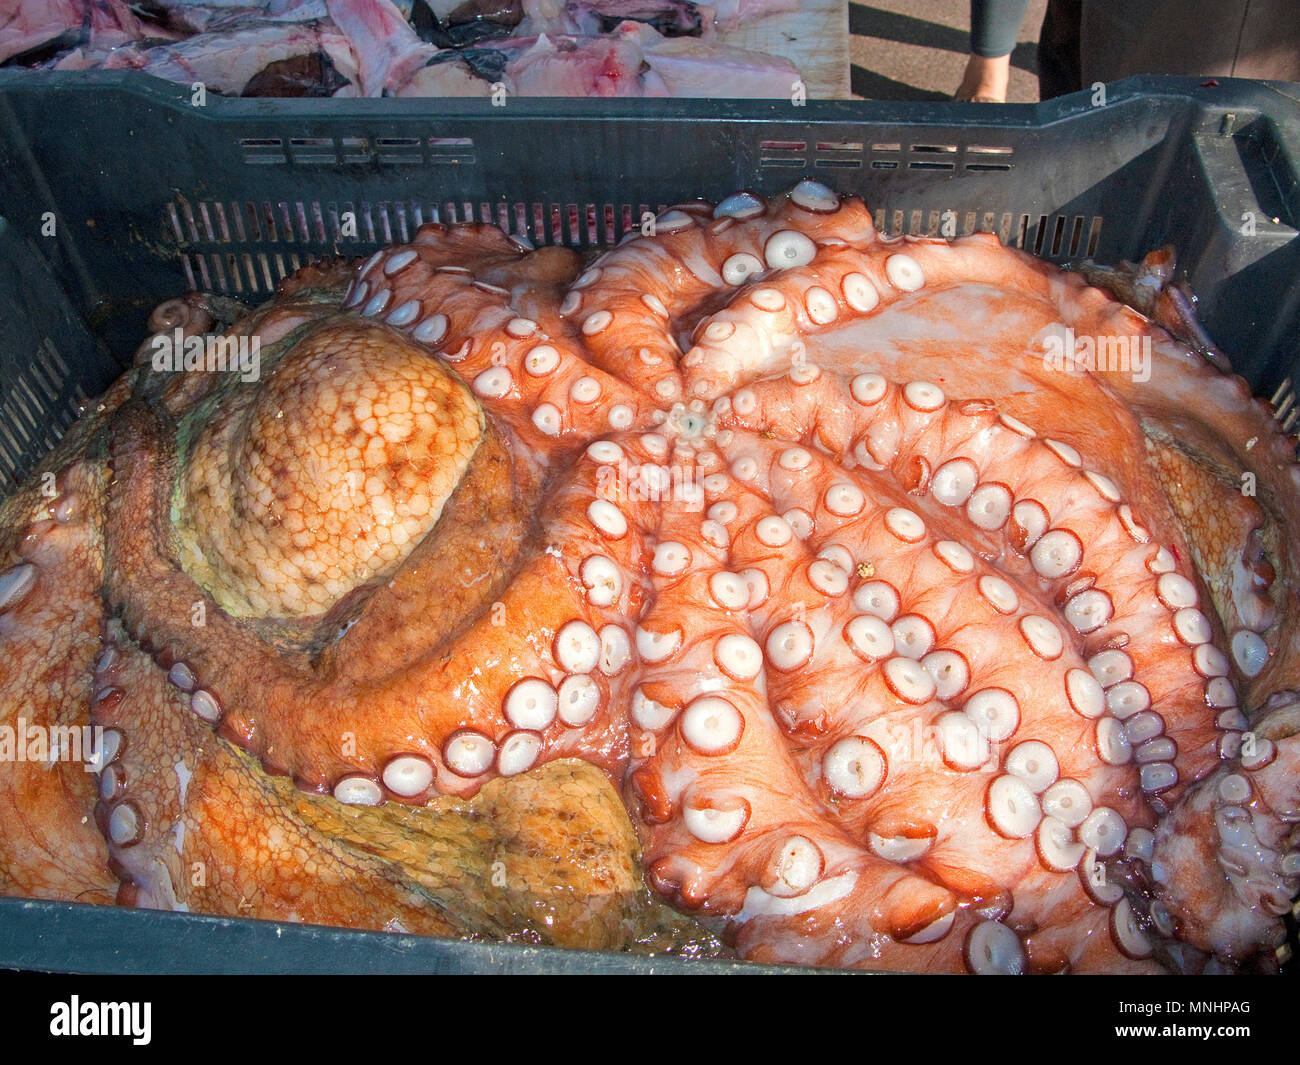 Catch of the day, fresh octopus at harbour Vieux Port, Marseille, Bouches-du-Rhone, Provence-Alpes-Côte d’Azur, South France, France, Europe Stock Photo